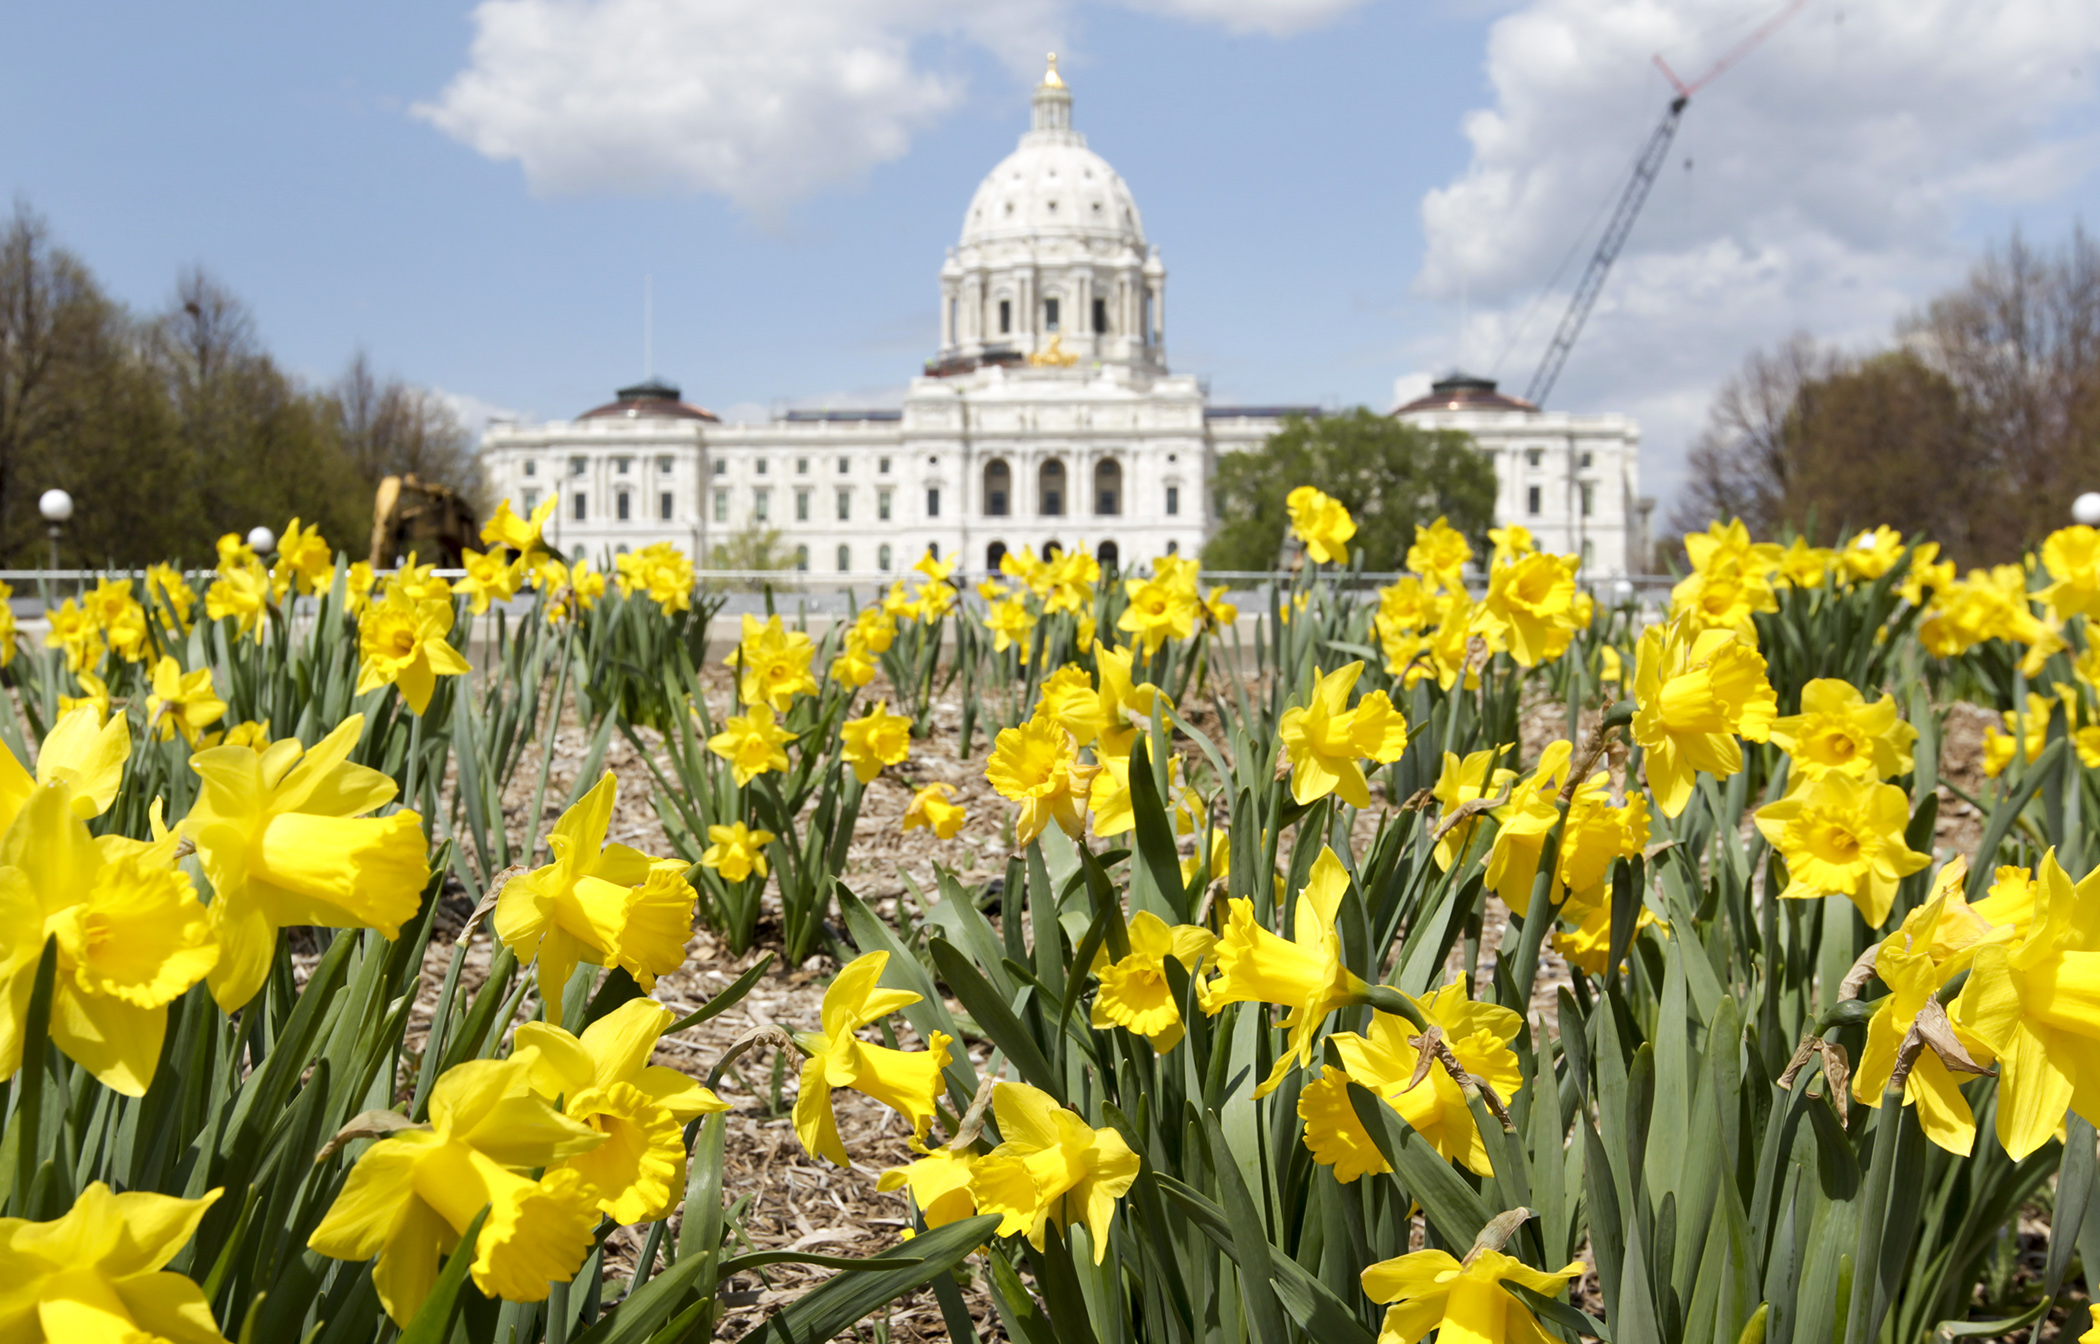 The State Capitol pictured May 3. House Photography file photo